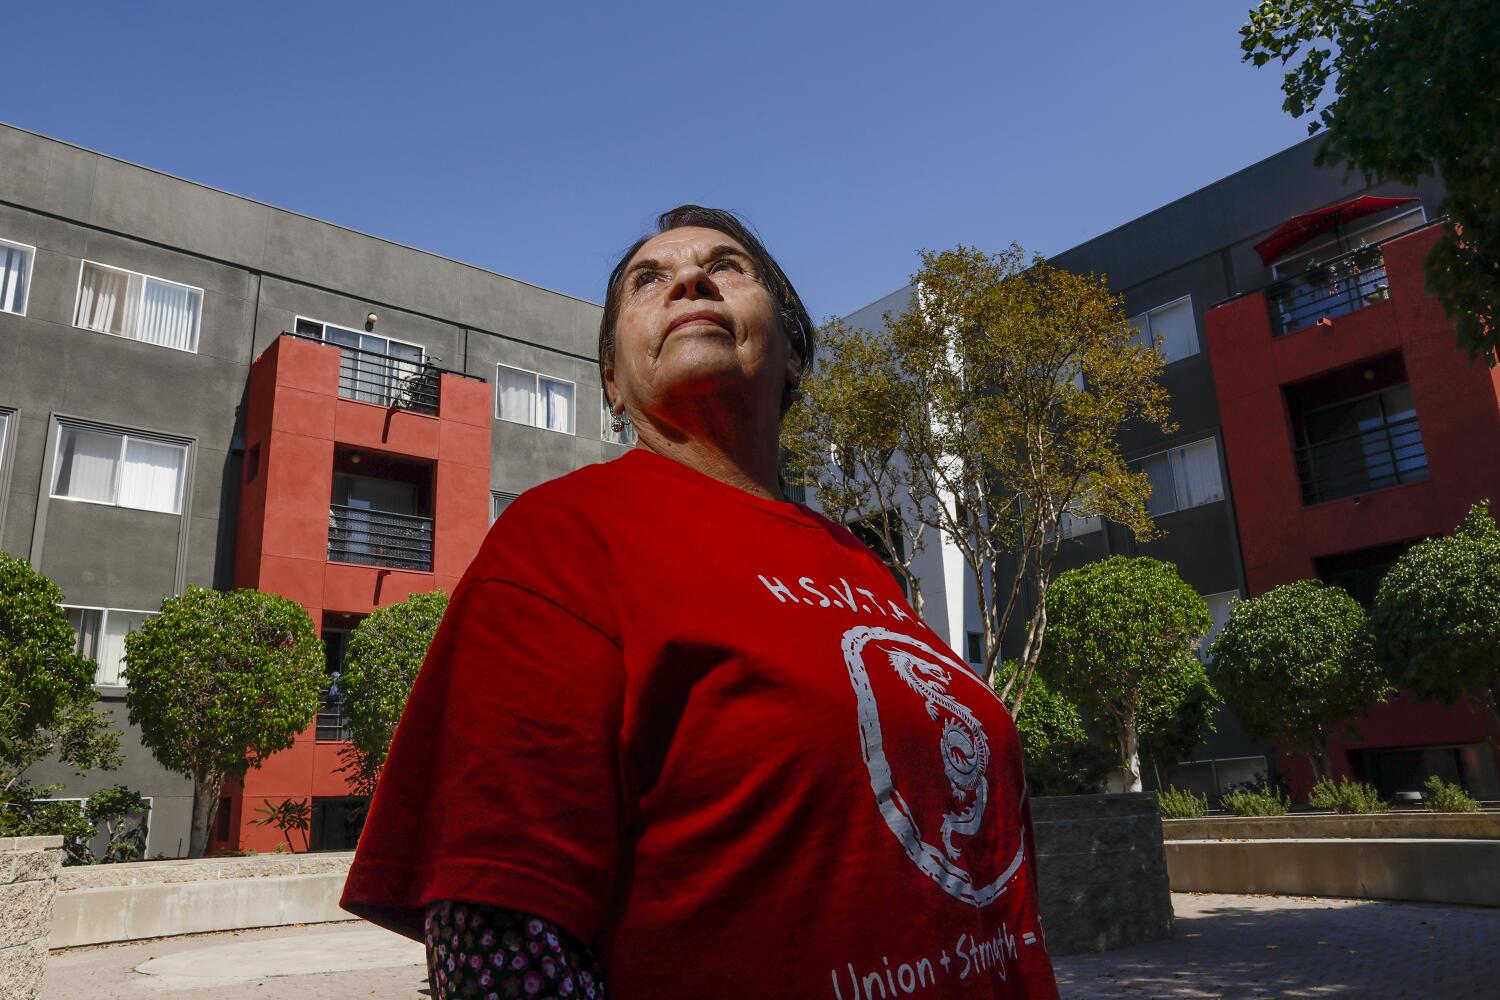 Eminent domain was used to evict a Chinatown family. Now it might help them stay housed